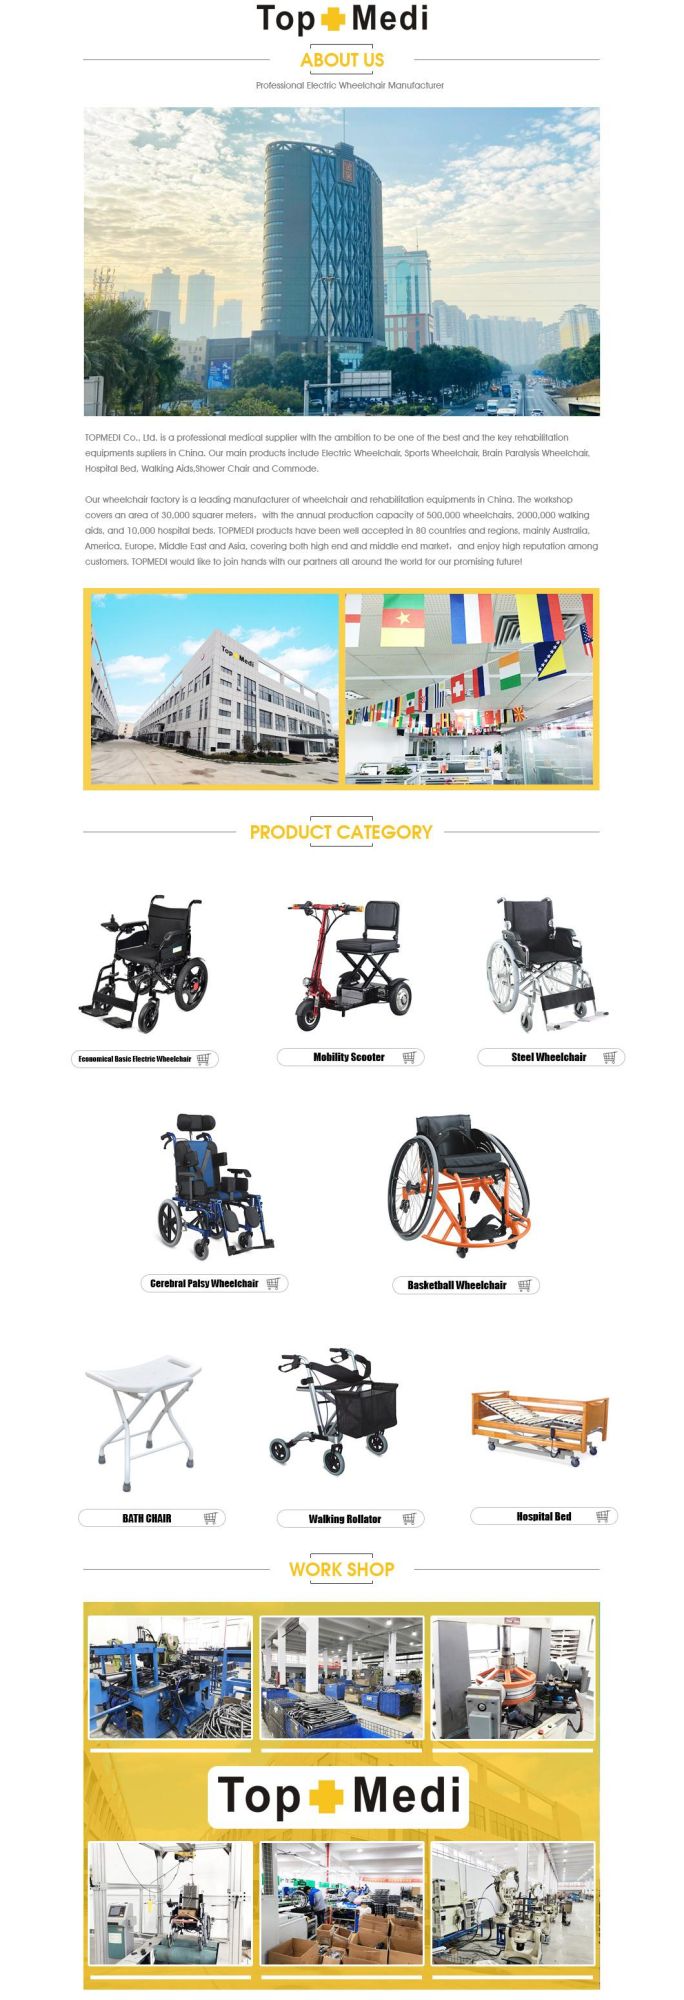 High End Soft Seat Aluminum Wheelchair with Small Mag Wheel